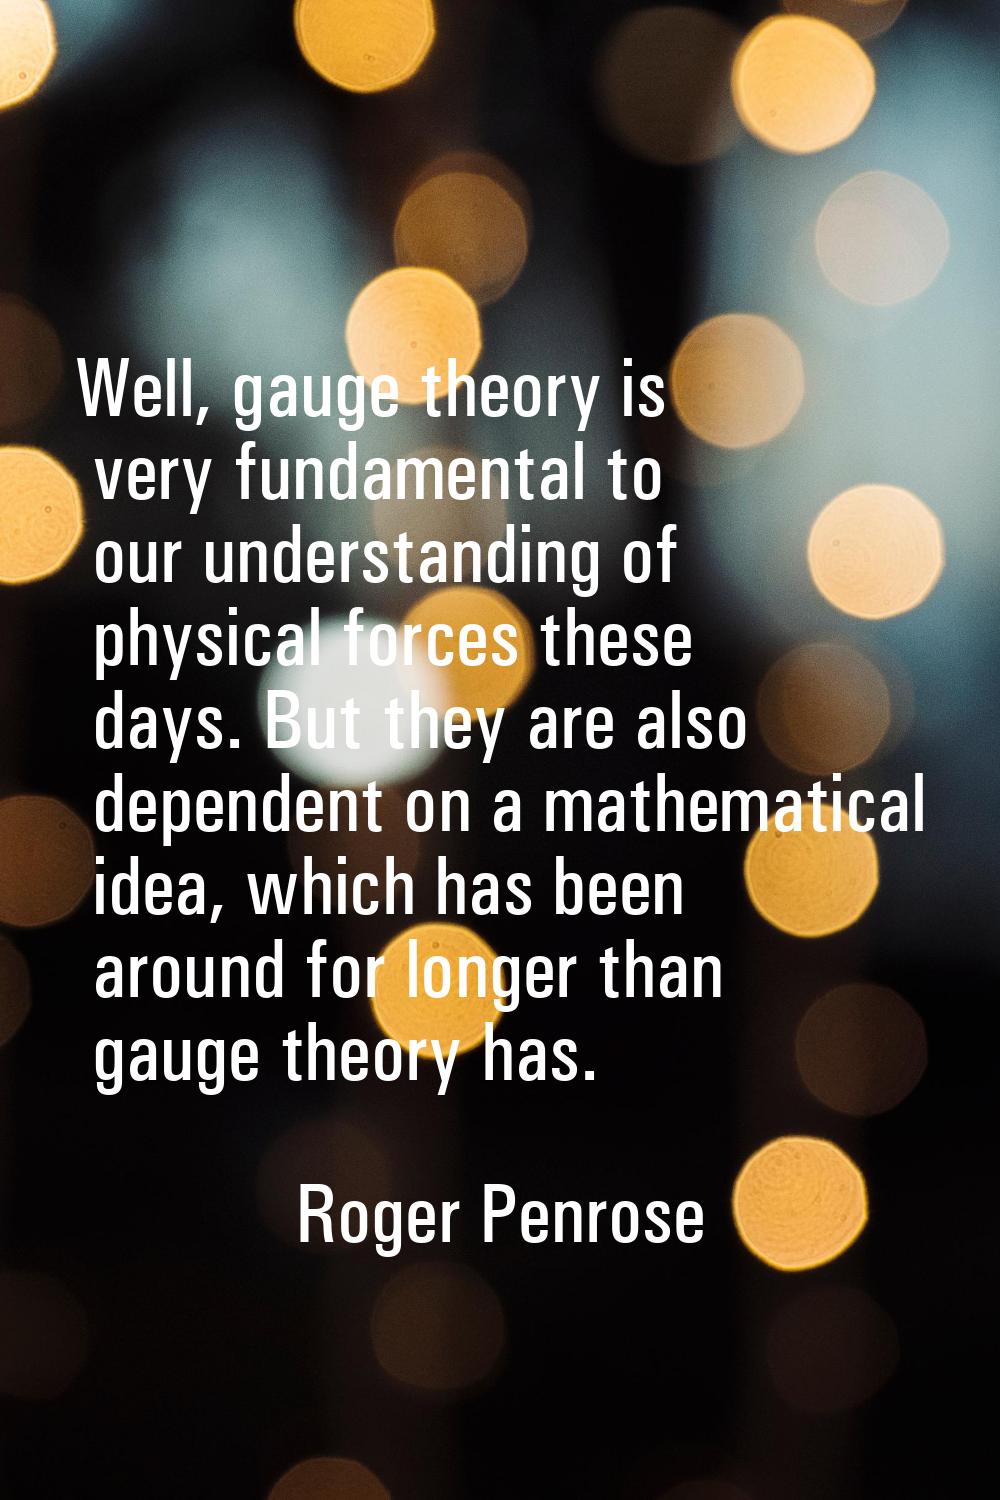 Well, gauge theory is very fundamental to our understanding of physical forces these days. But they